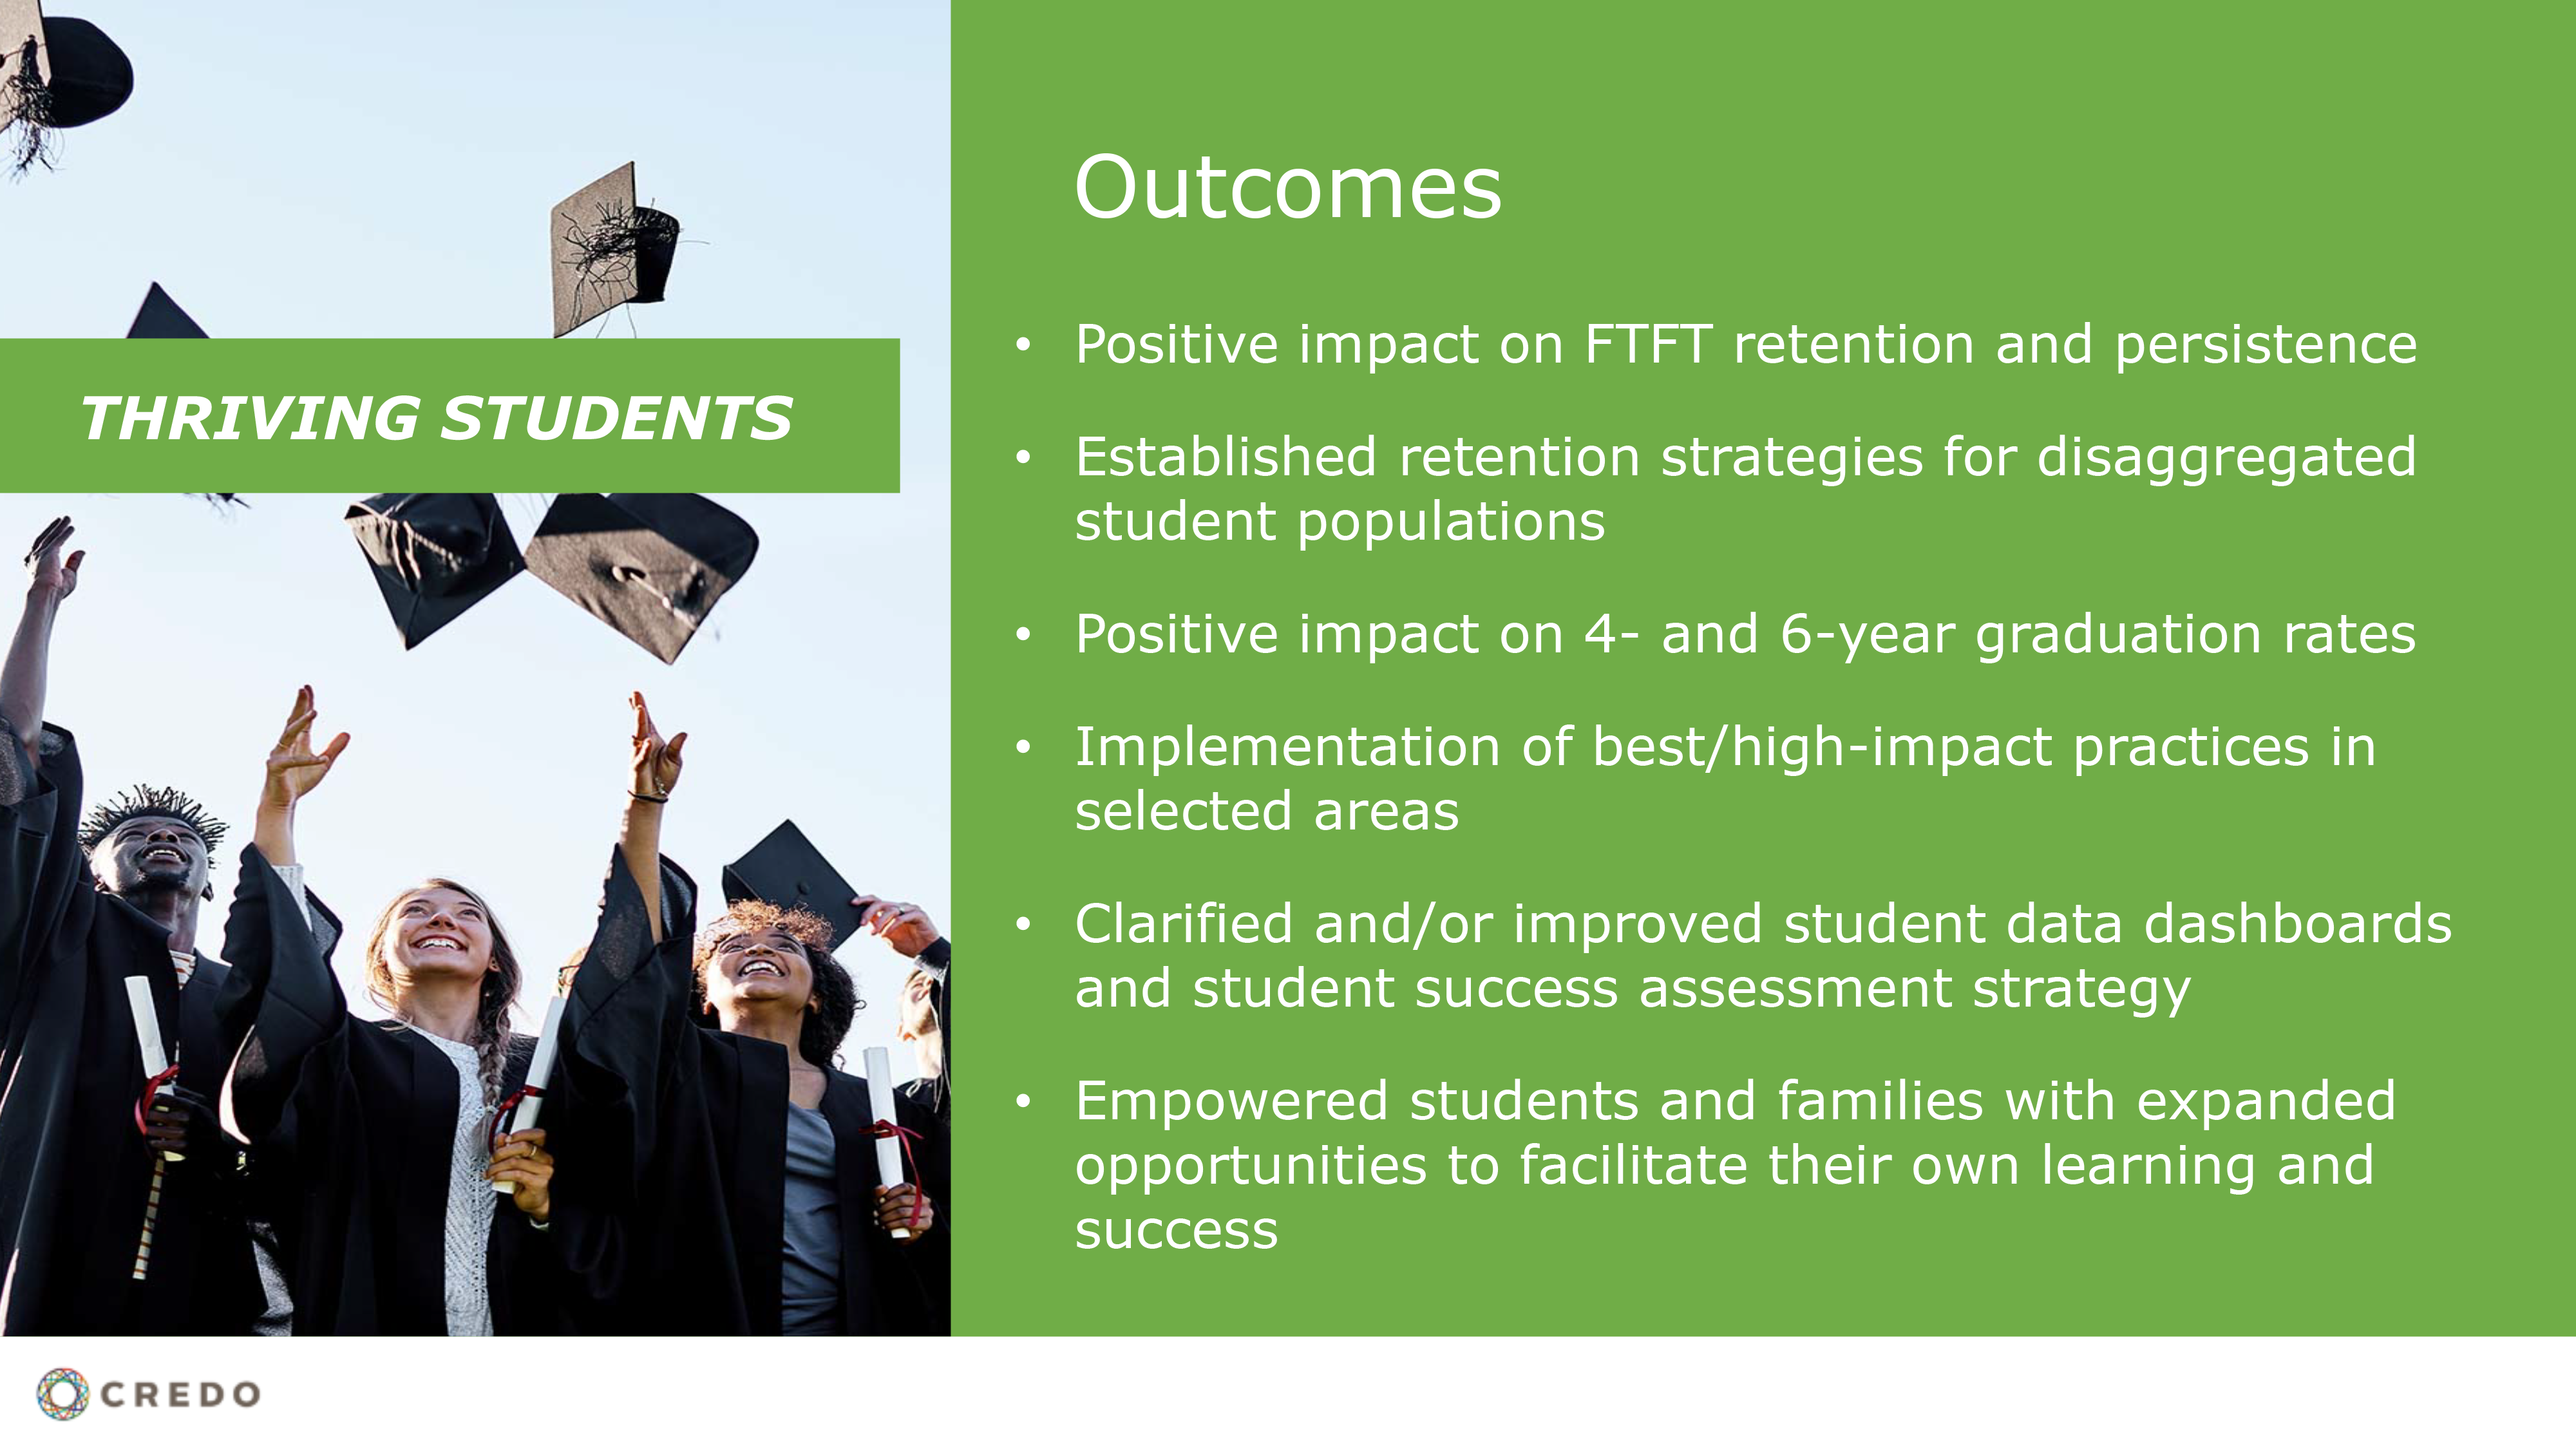 Outcomes - thriving students